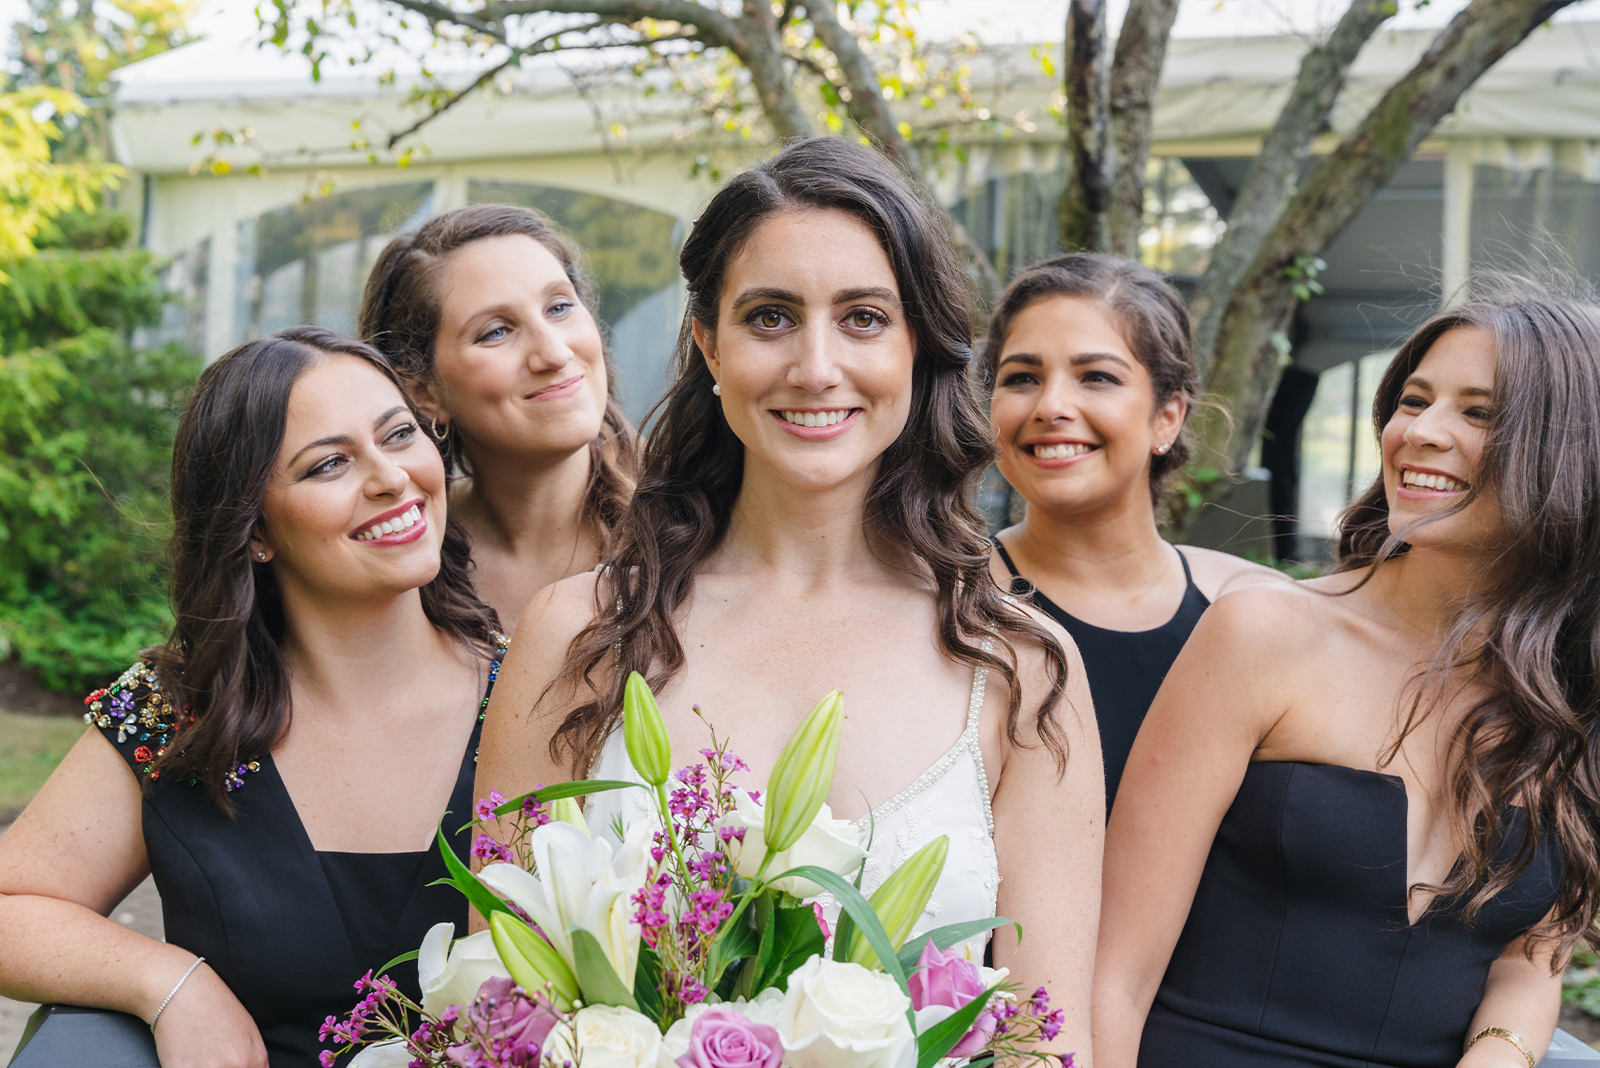 Bride and bridesmaids, bridal party portrait, classic, smile, beautiful, trees, nature, green, classy wedding ceremony at Landerhaven, Mayfield Heights OH